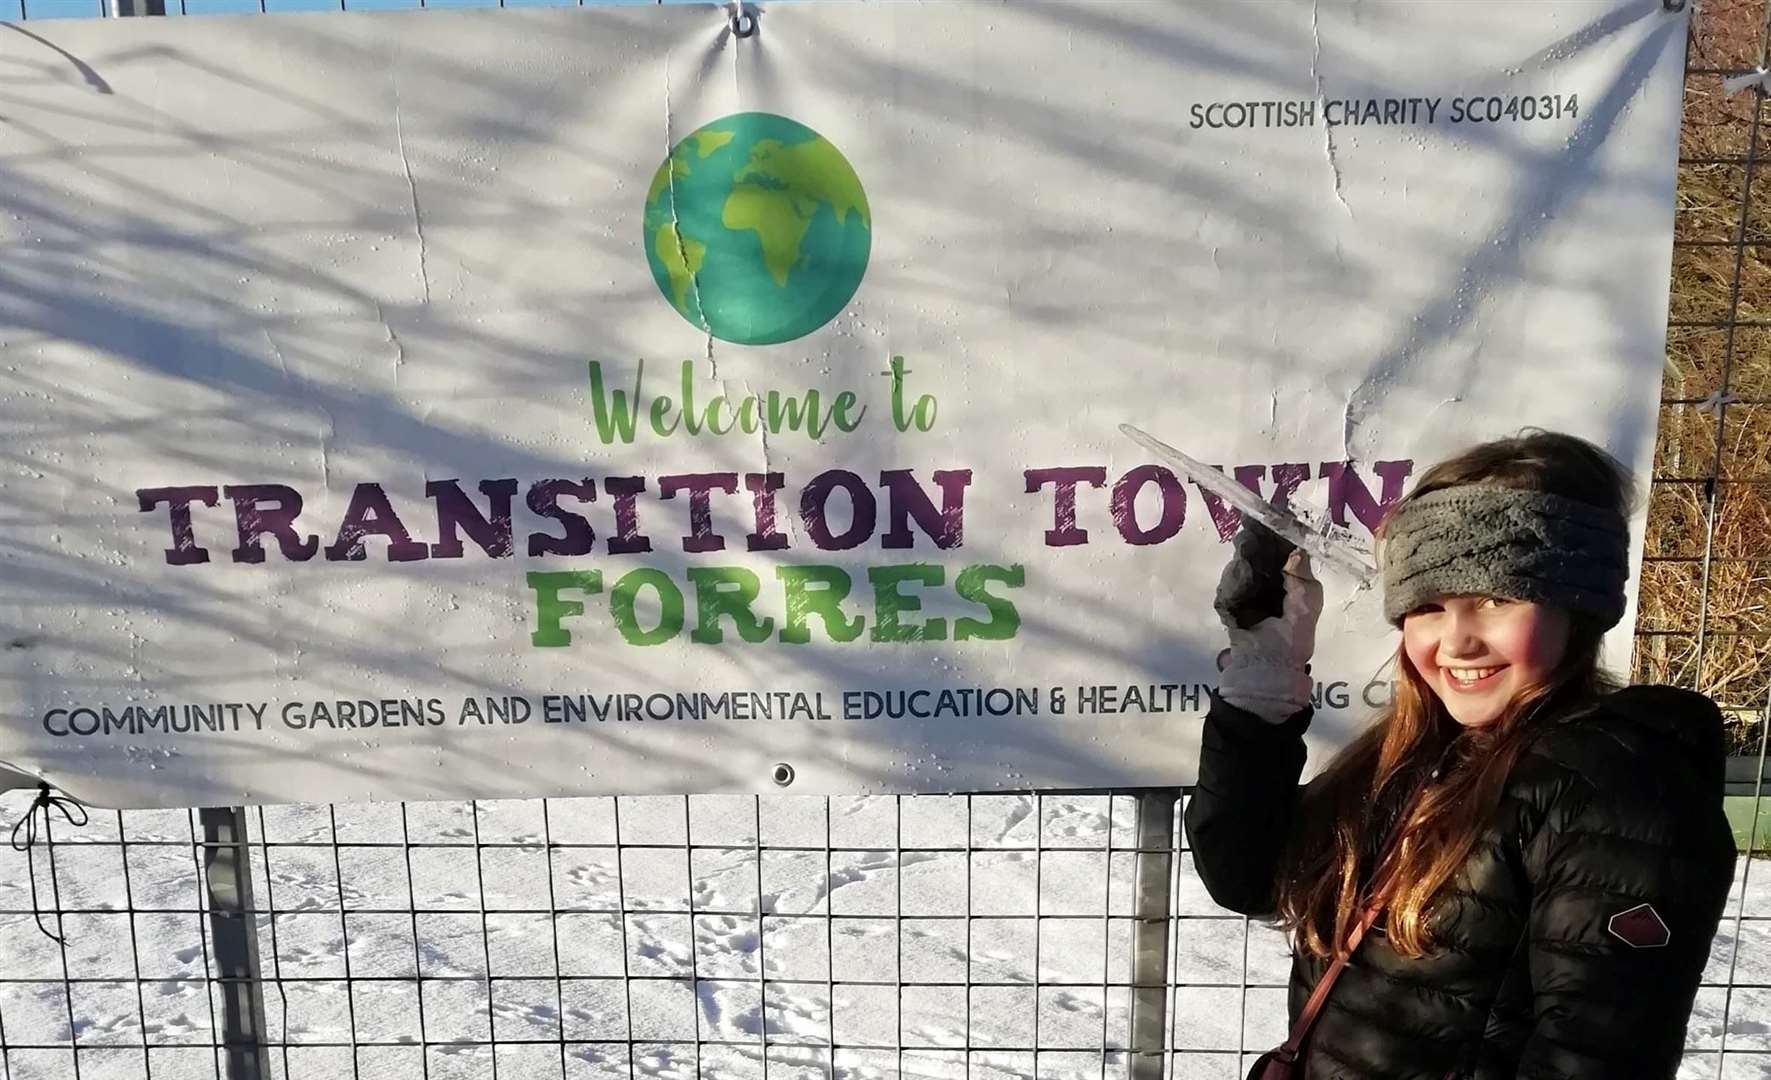 Transition Town has made good use of the common good land since 2009.